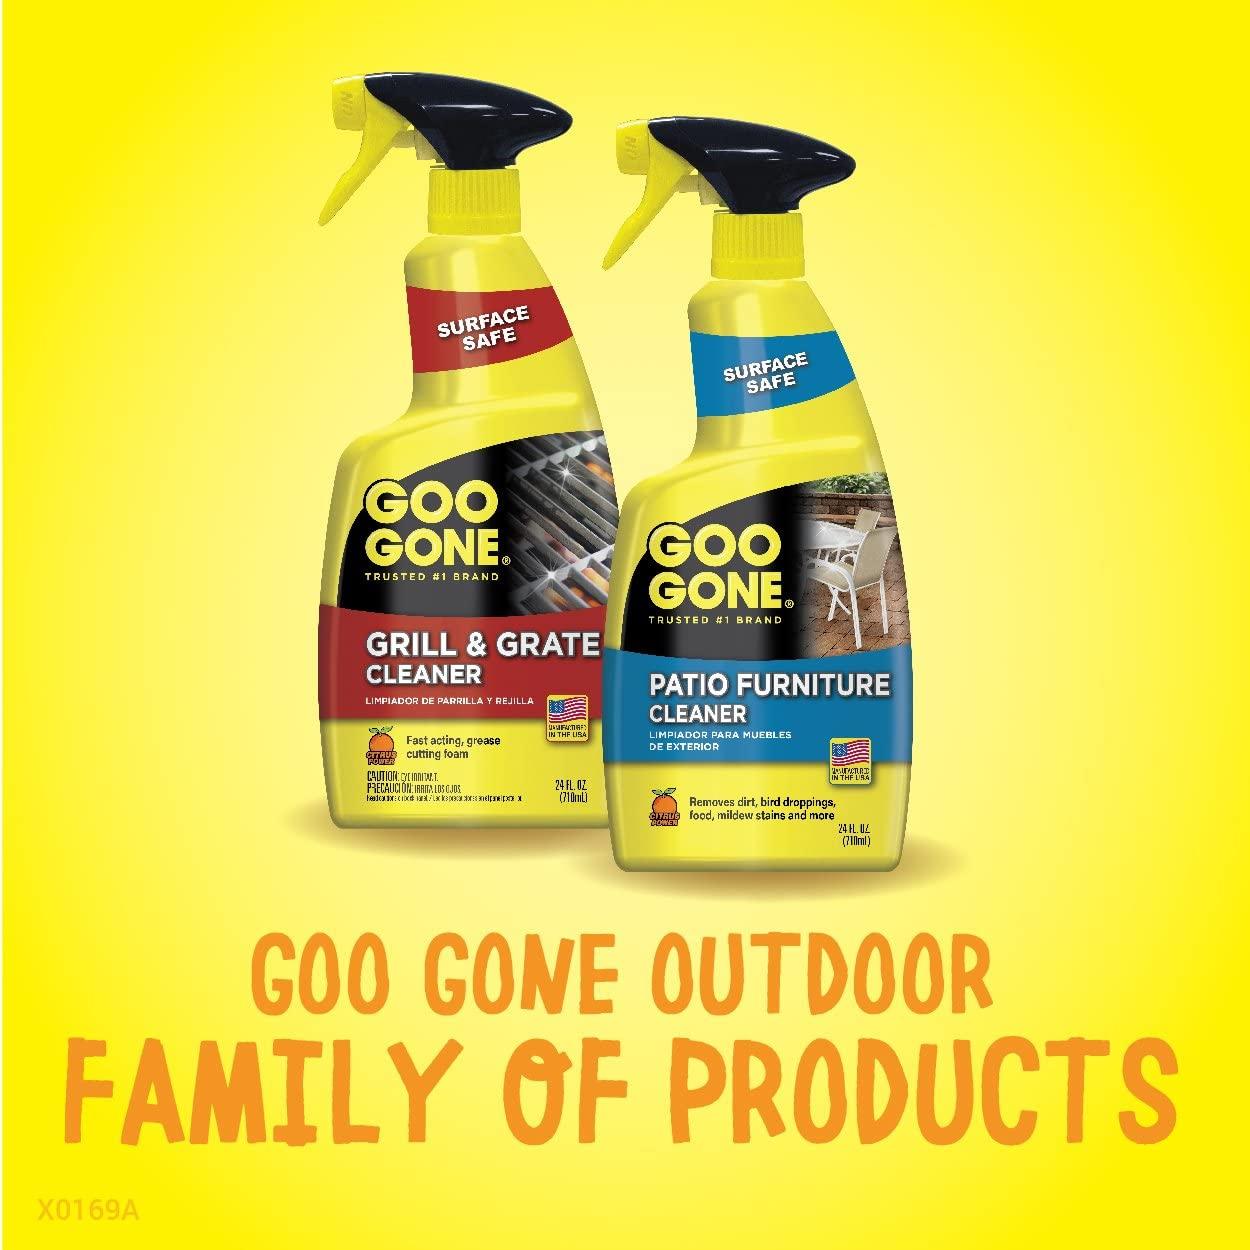 Lot Of 2 Goo Gone Oven and Grill Cleaner 28 fl oz Brand New